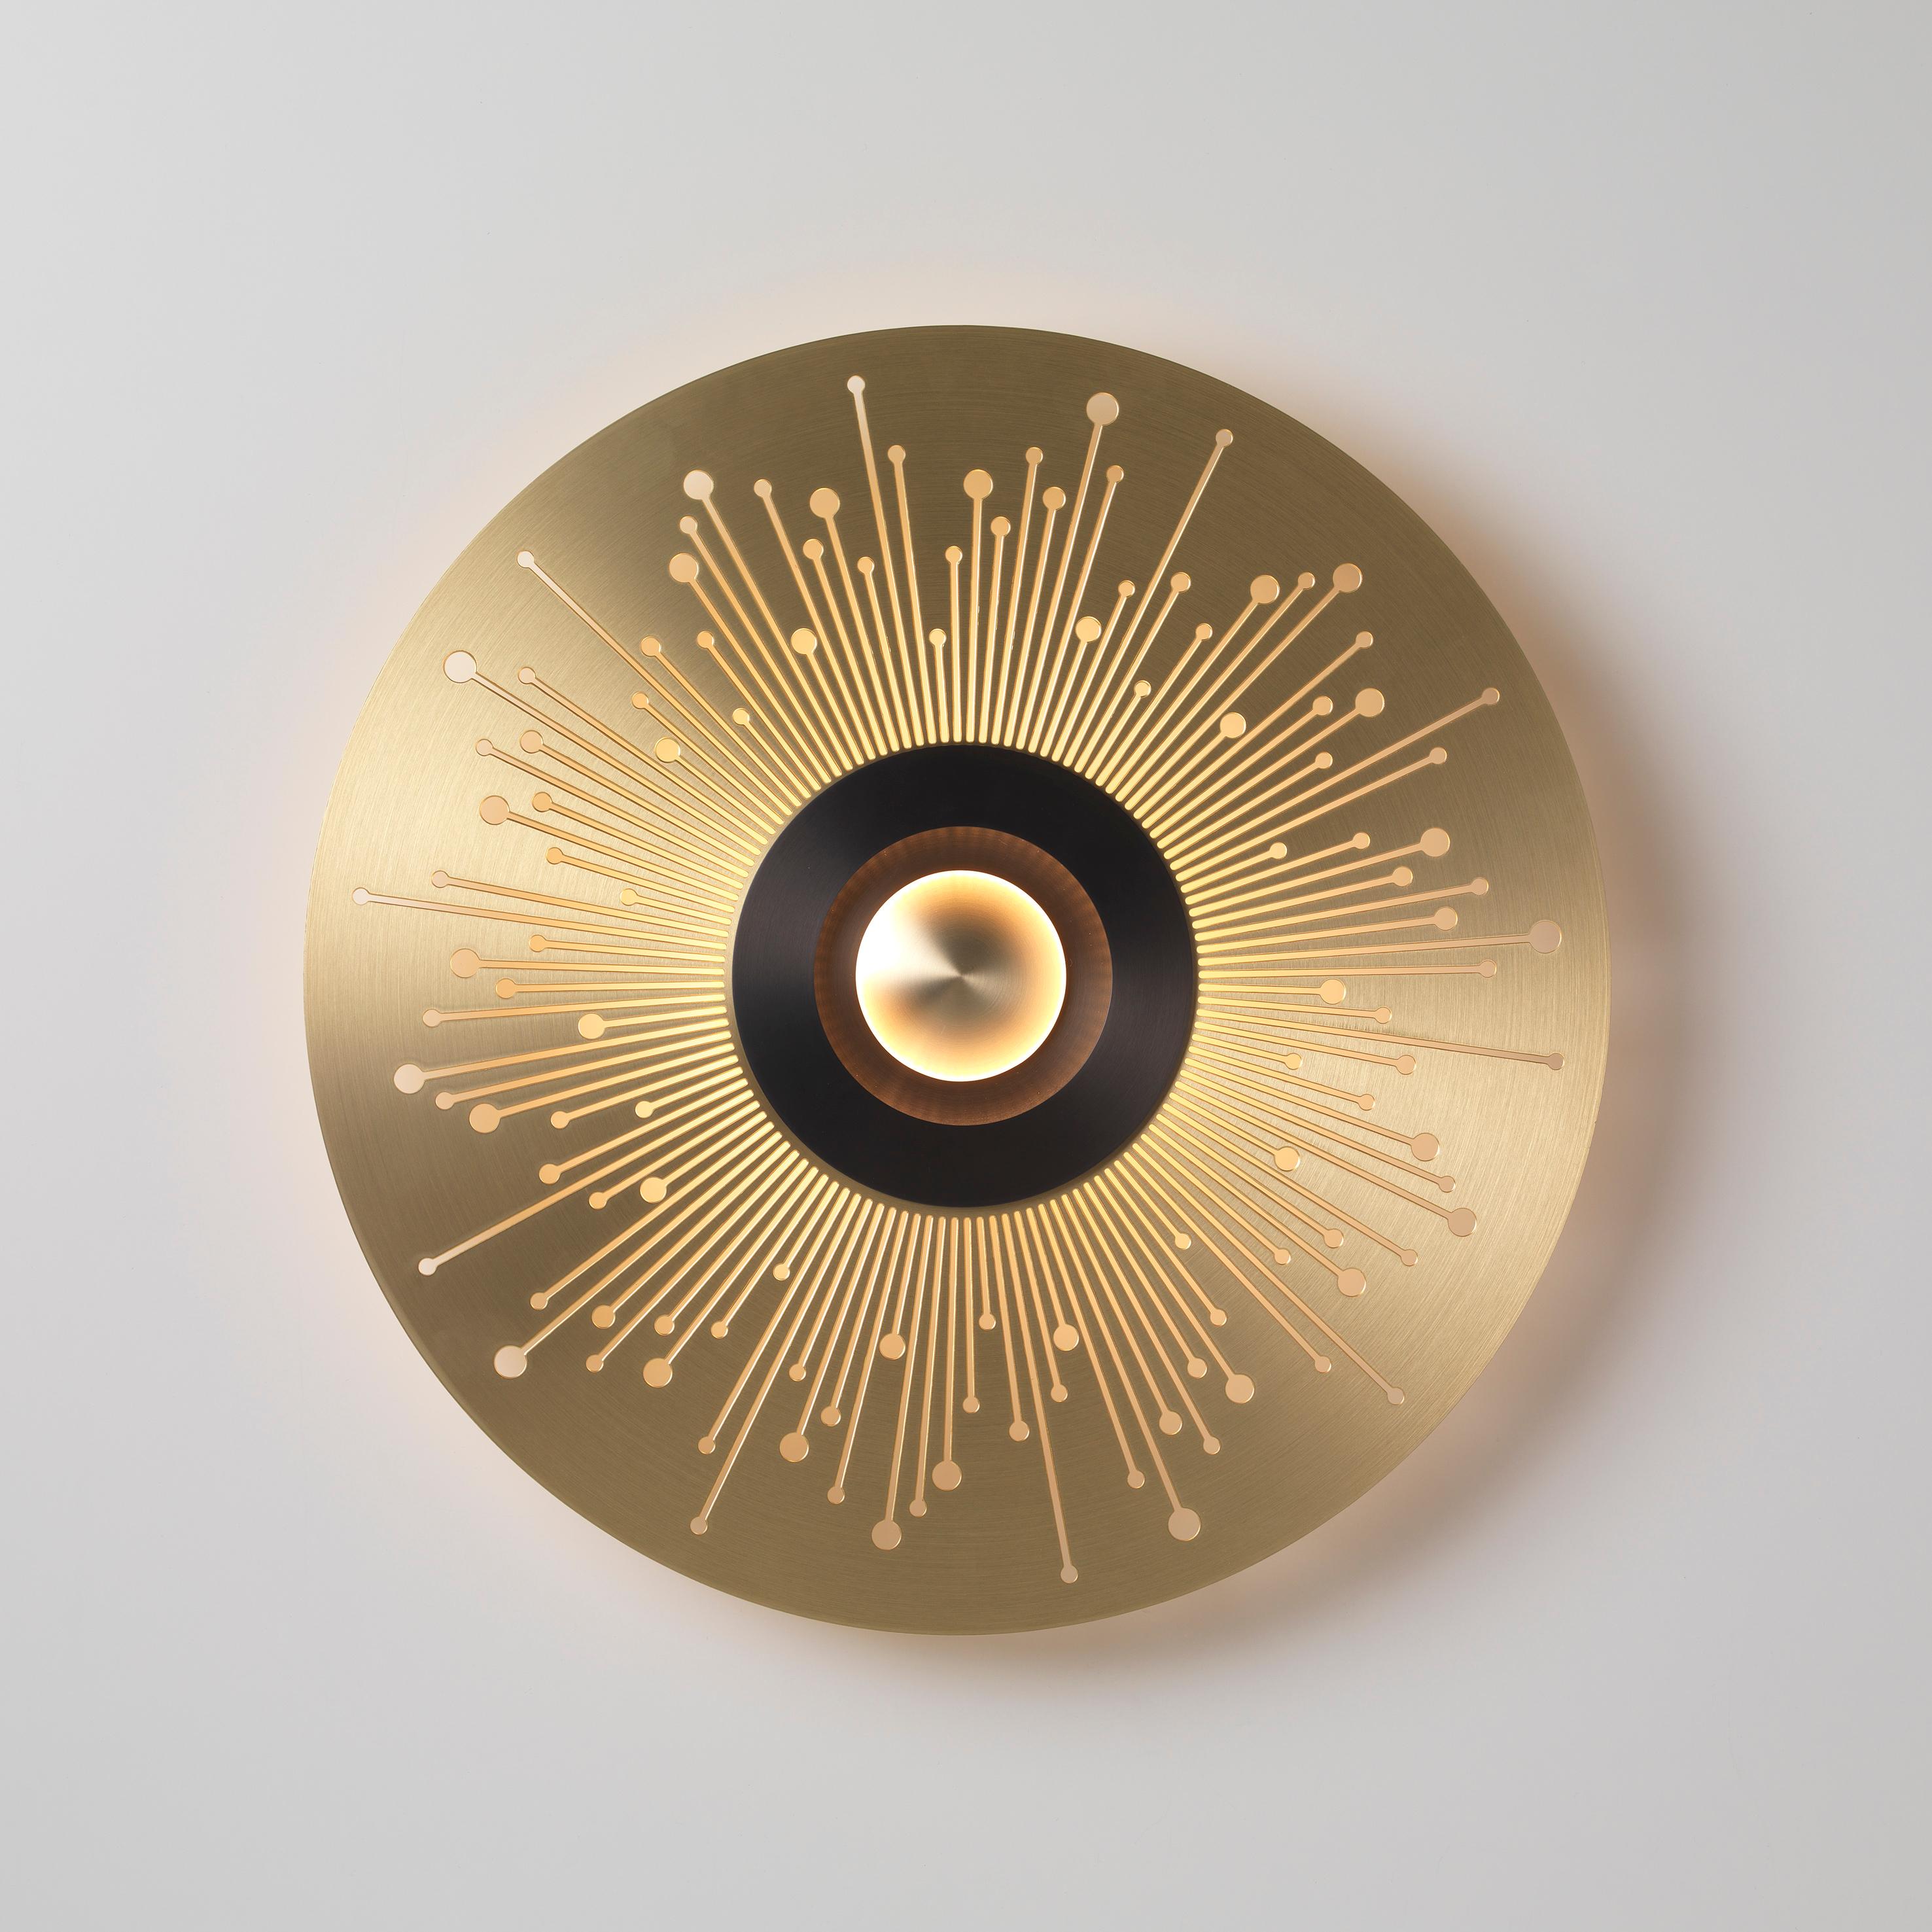 Earth Sun 440 wall light by Emilie Cathelineau
Dimensions: D44 X H5 cm
Materials: Solid brass,Polycarbonate diffuser.
Others finishes and dimensions are available.

All our lamps can be wired according to each country. If sold to the USA it